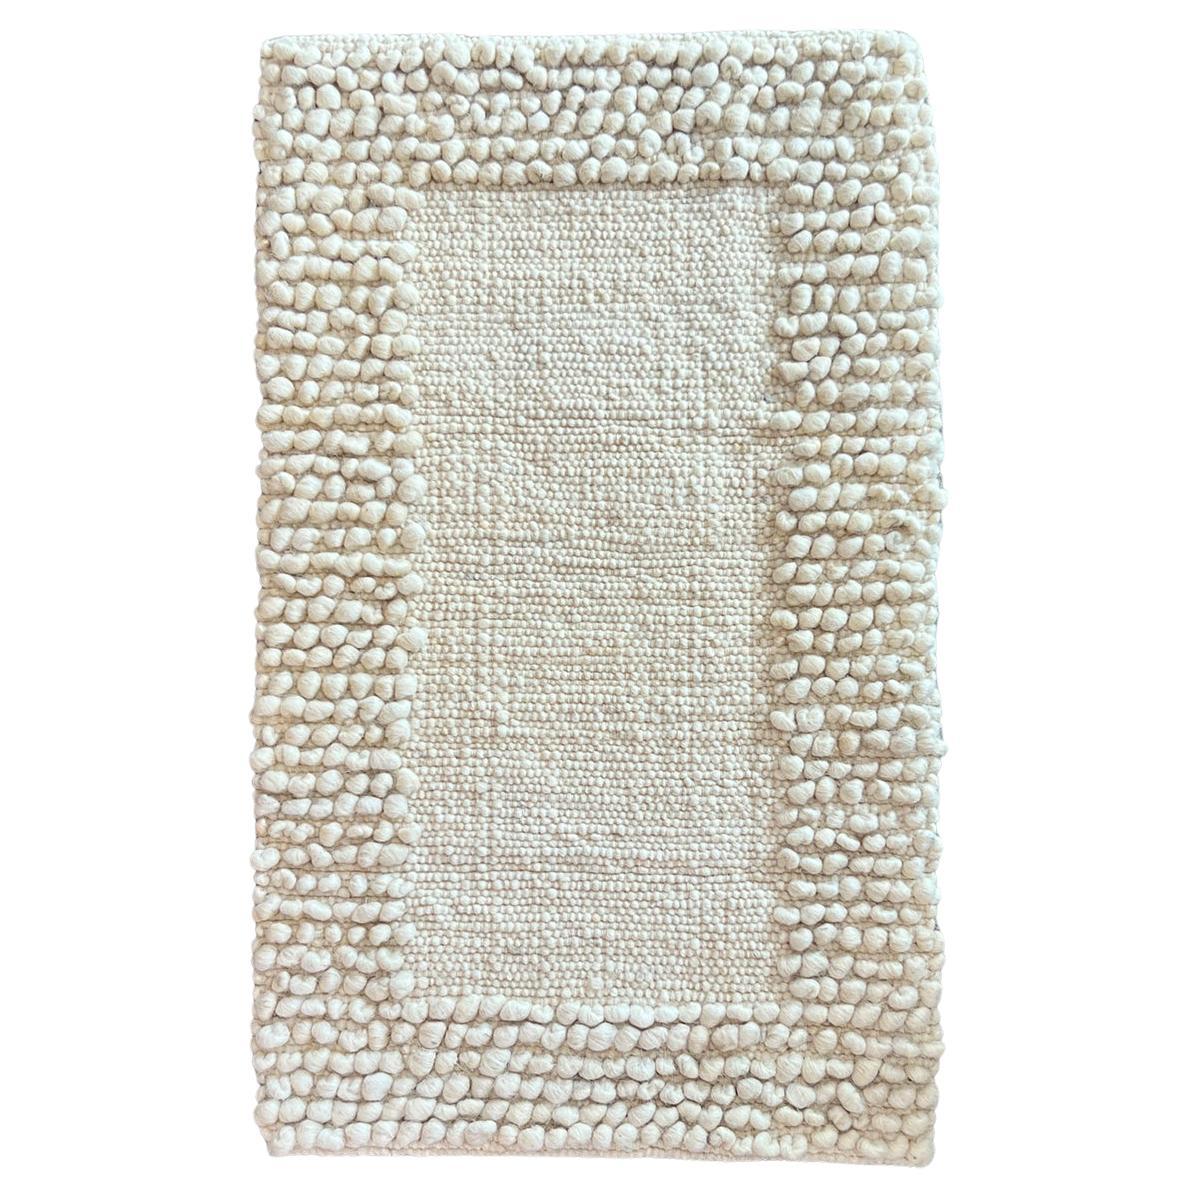 Fatima Bobble Frame Sheep Wool Area Rug in White 2.5ft by 4ft, Handmade